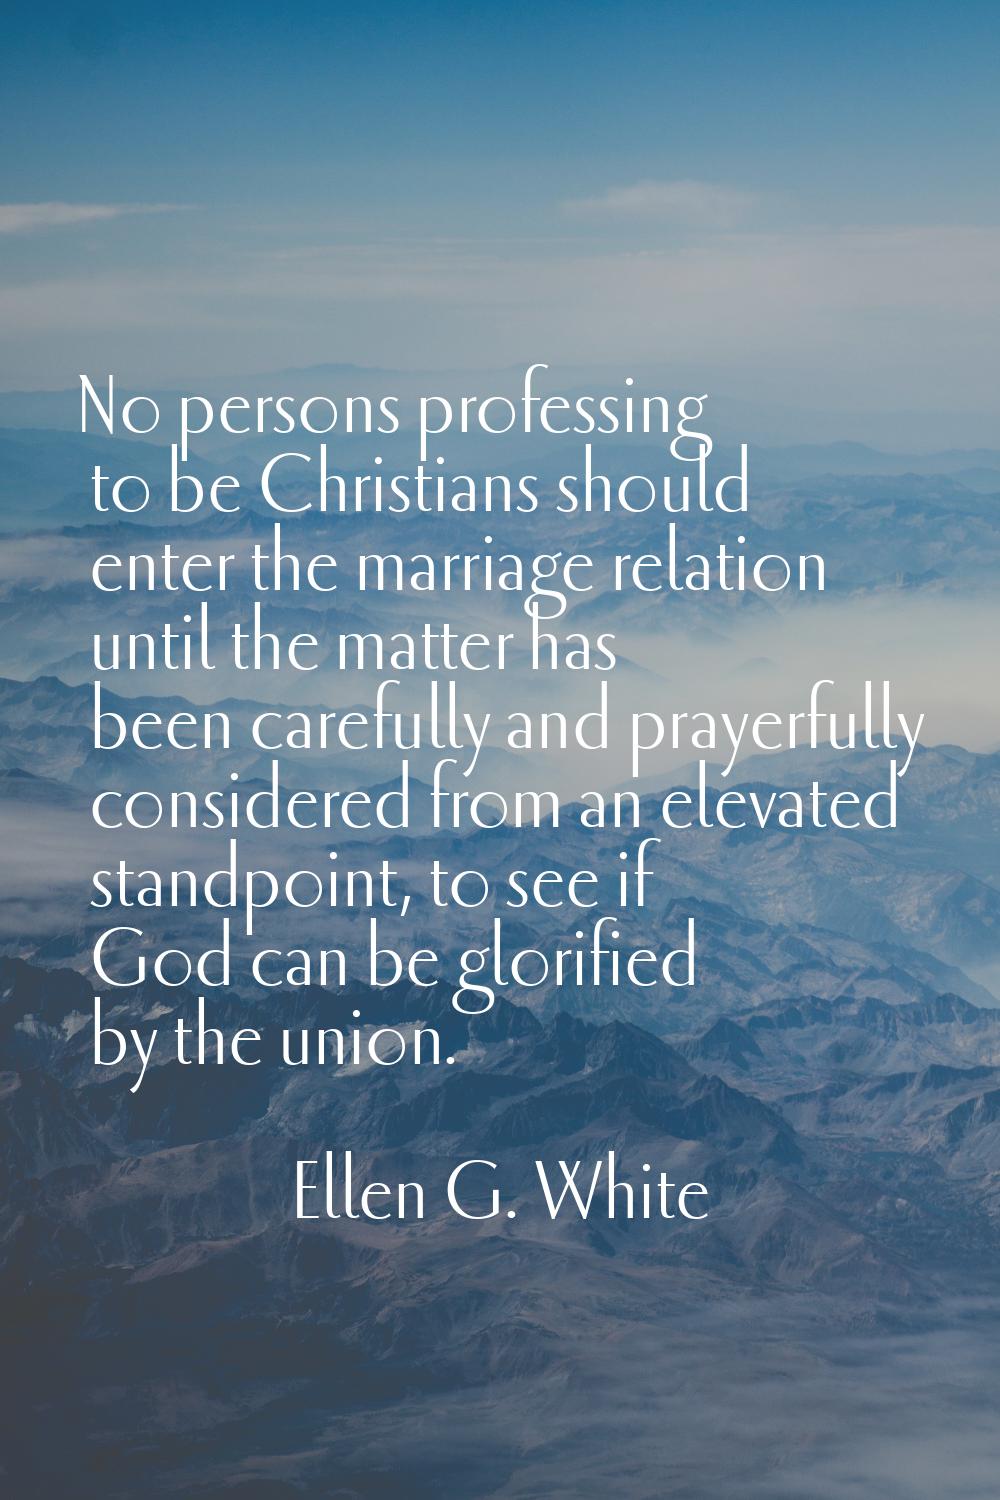 No persons professing to be Christians should enter the marriage relation until the matter has been